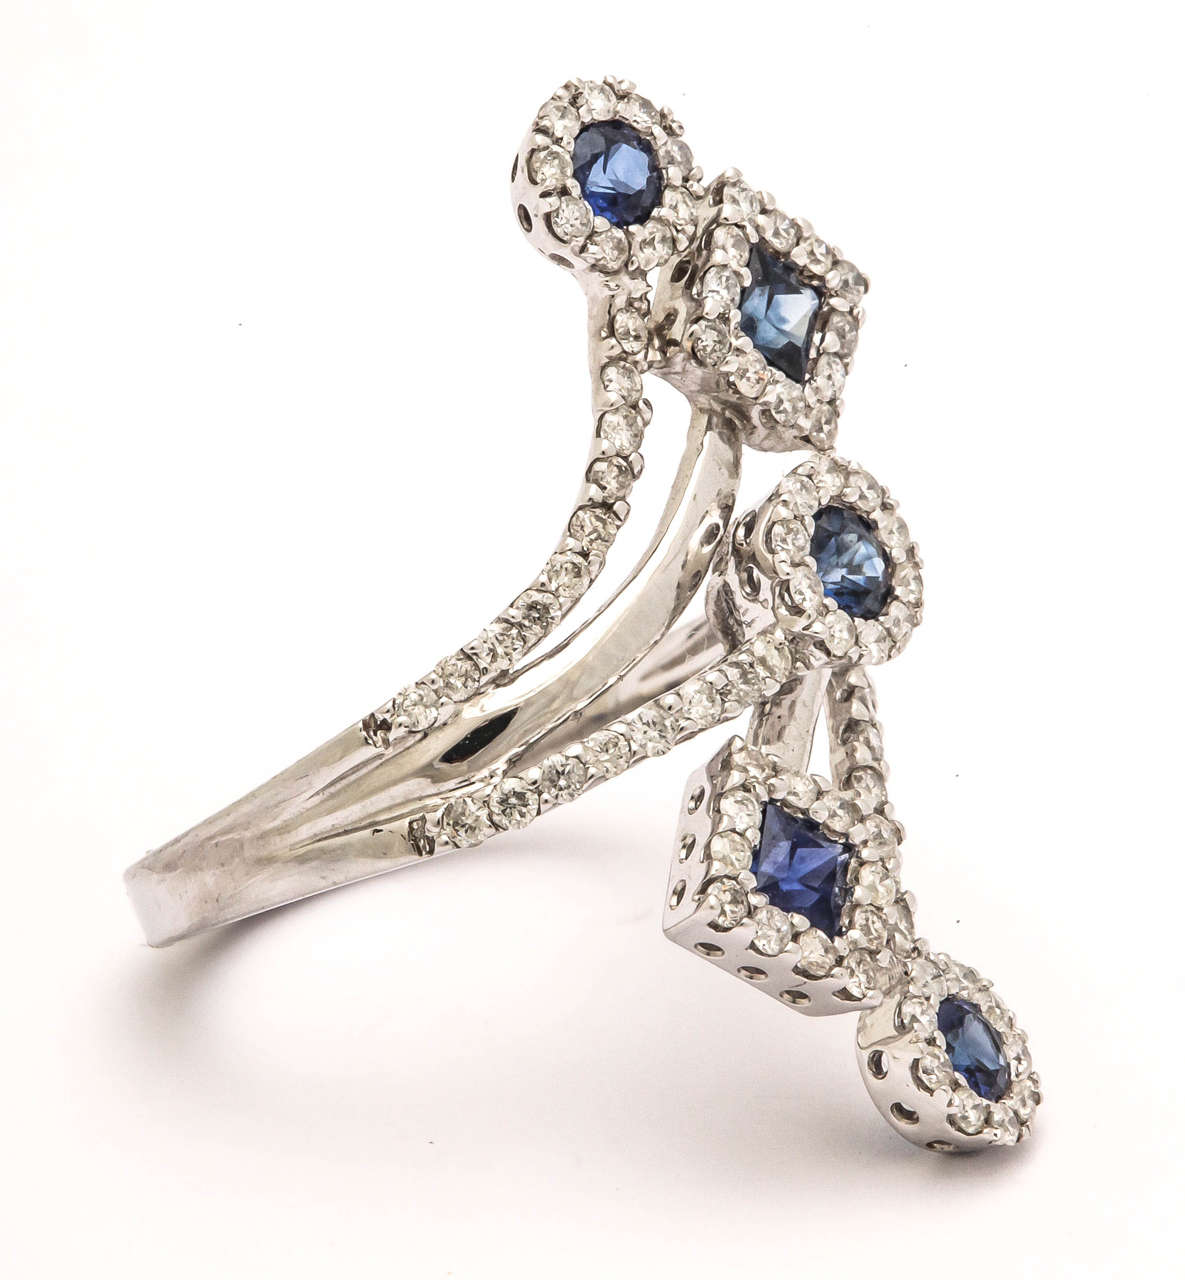 Gorgeous spray of blue sapphires and diamonds from knuckle to knuckle. There are 1.10 ct blue sapphires in round and square cuts and .85 cts white diamonds surrounding the sapphires and down the shank.
A great party ring!